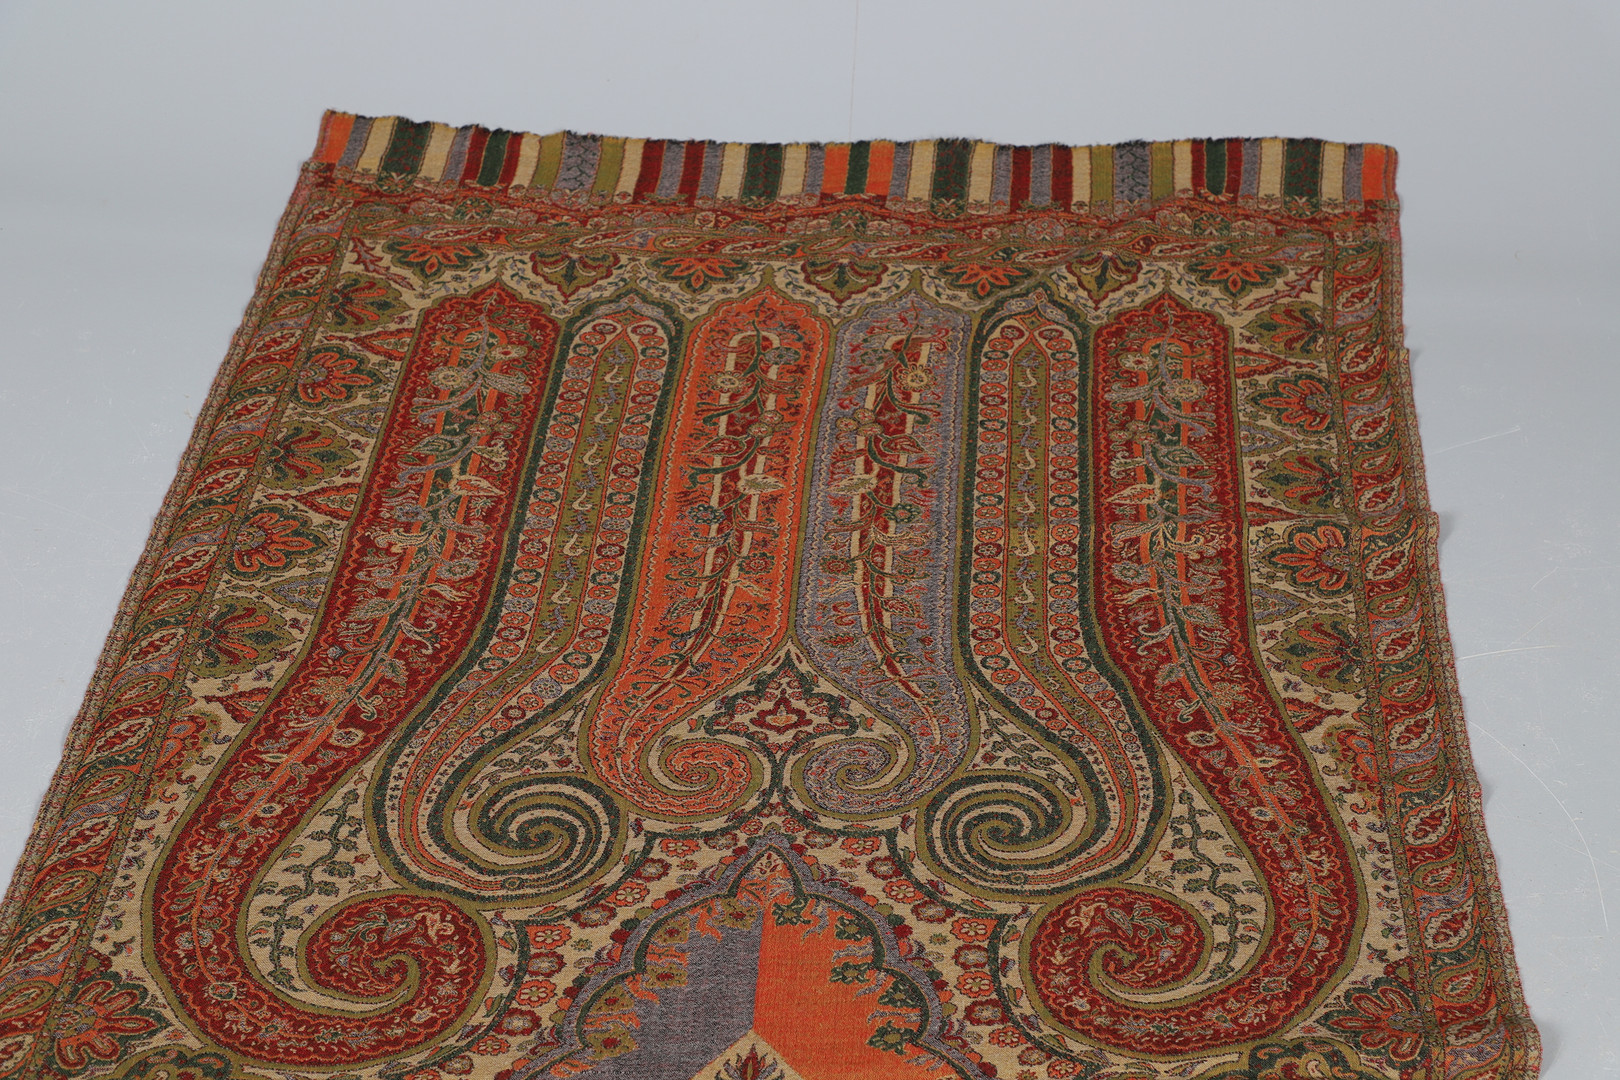 LATE 19THC PAISLEY SHAWL & VARIOUS TEXTILES. - Image 18 of 26